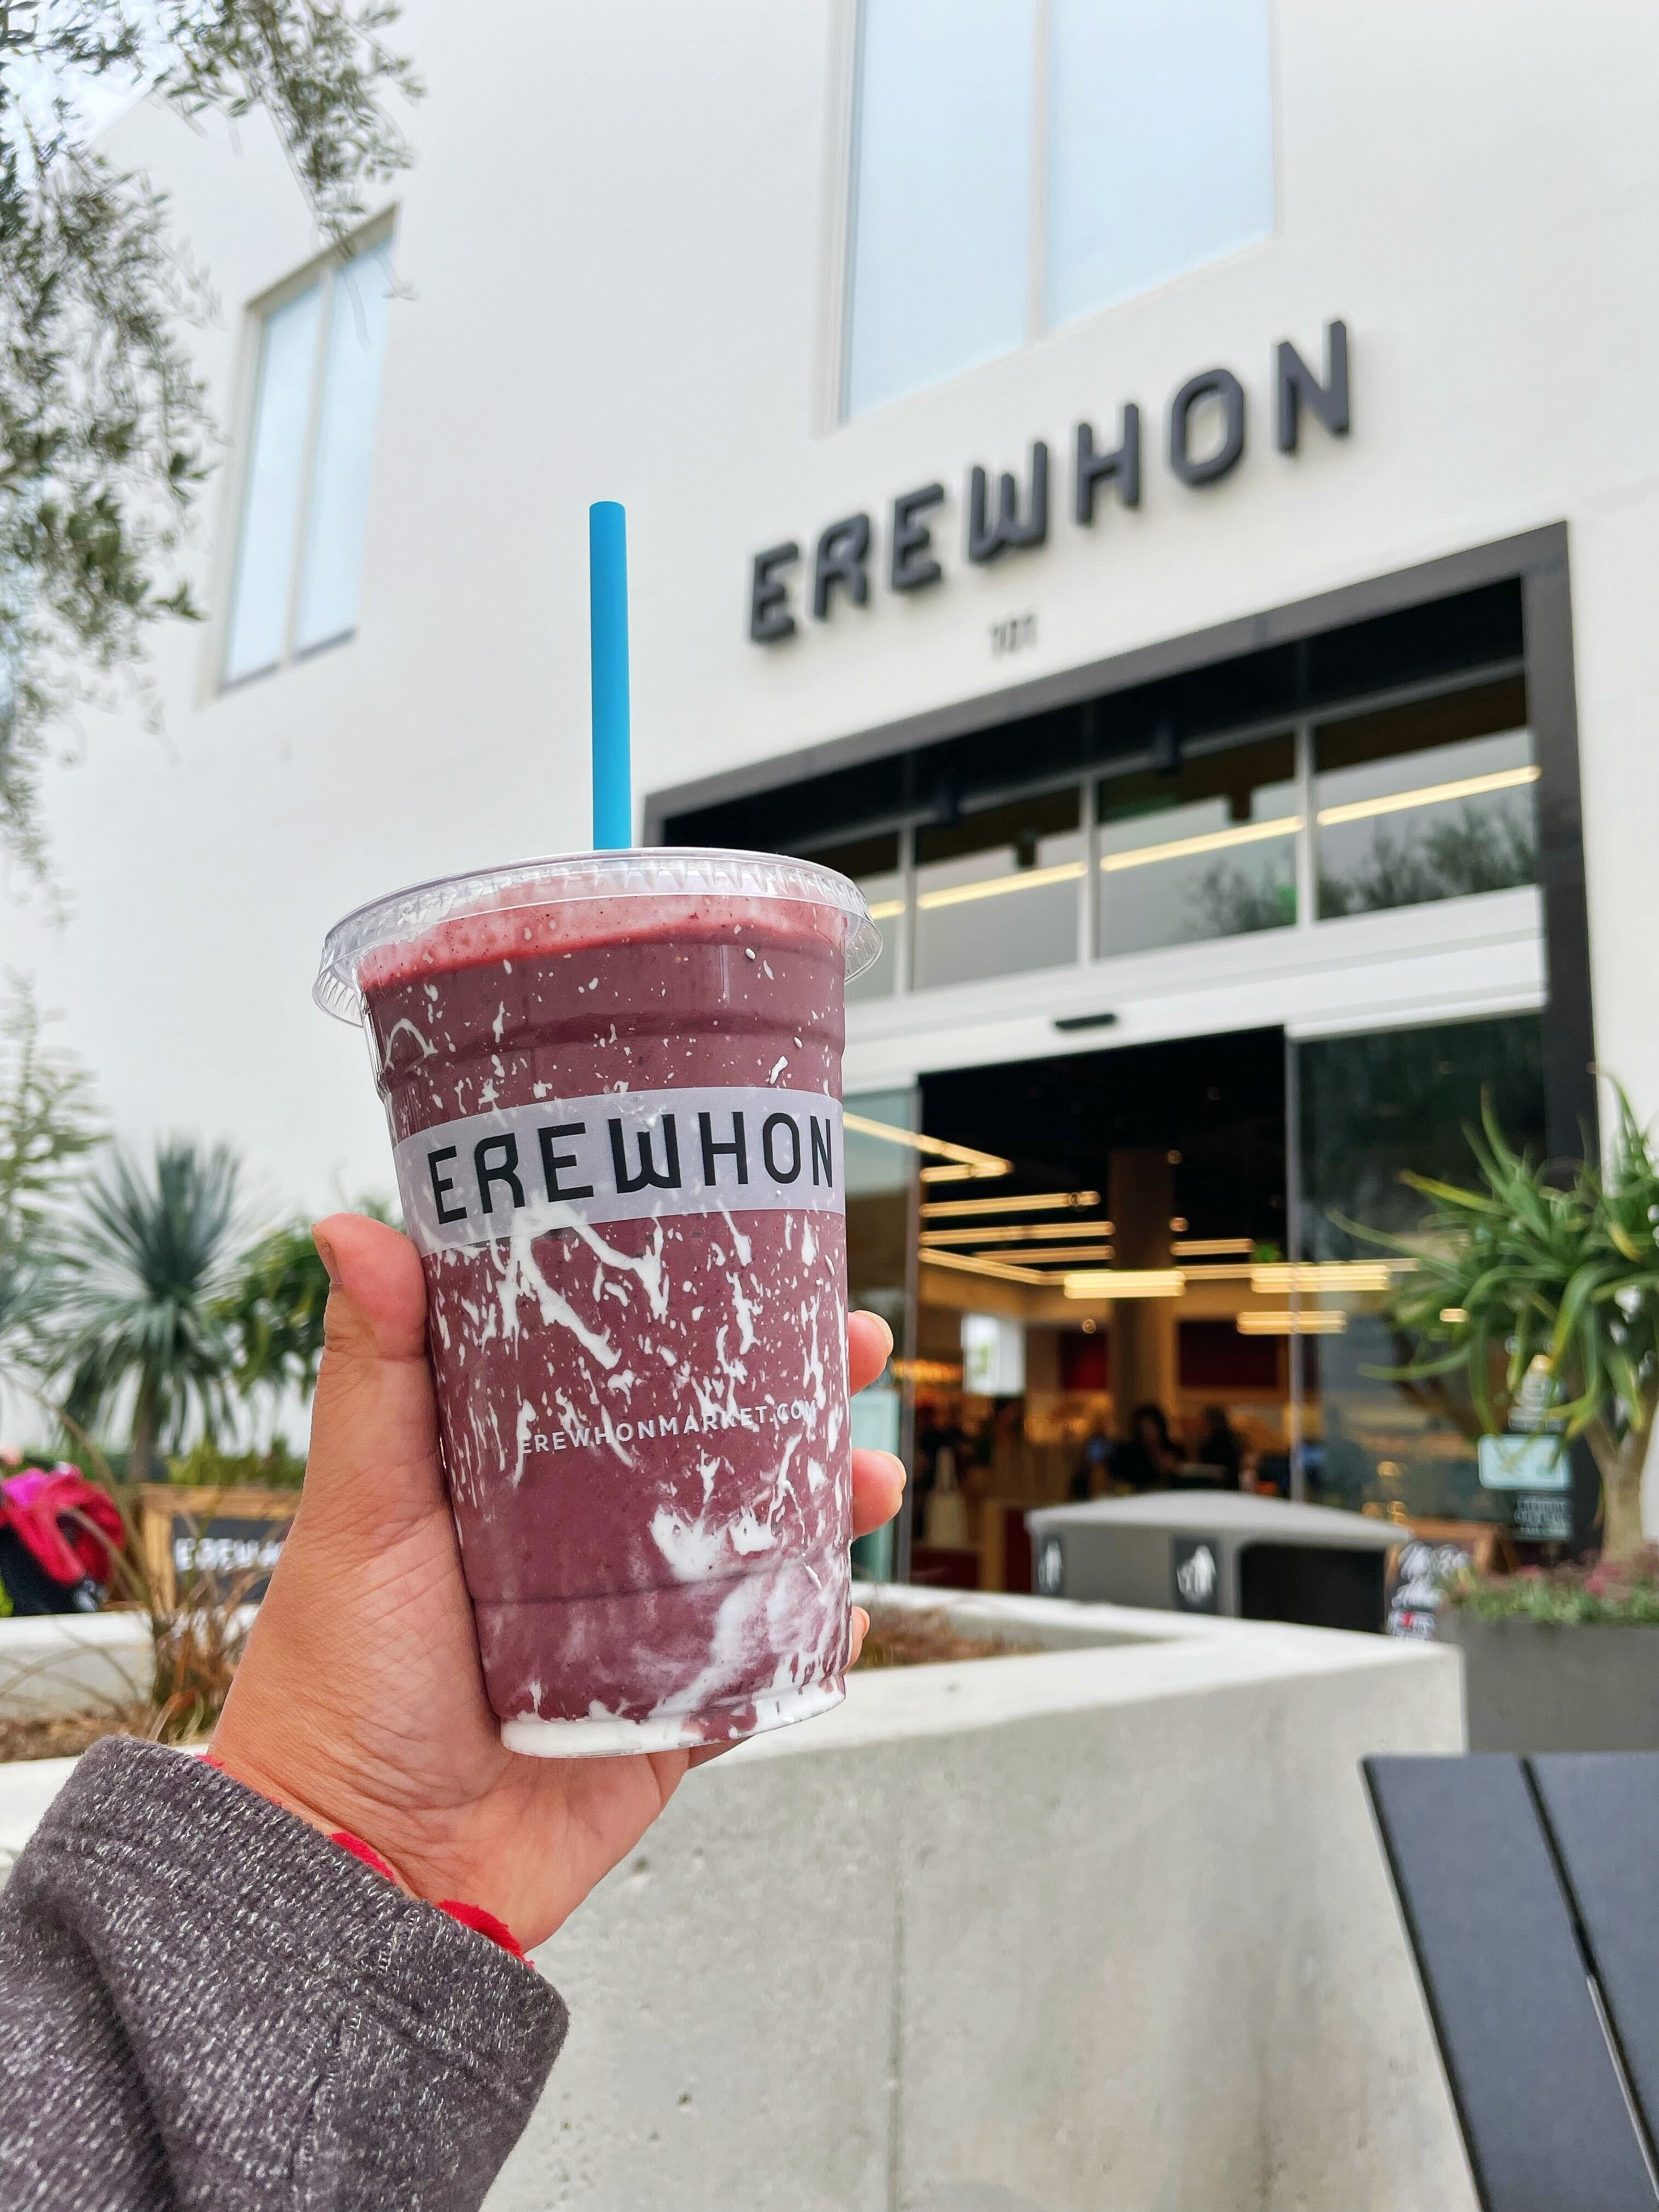 The author is holding up an Erewhon smoothie in front of the Erewhon store